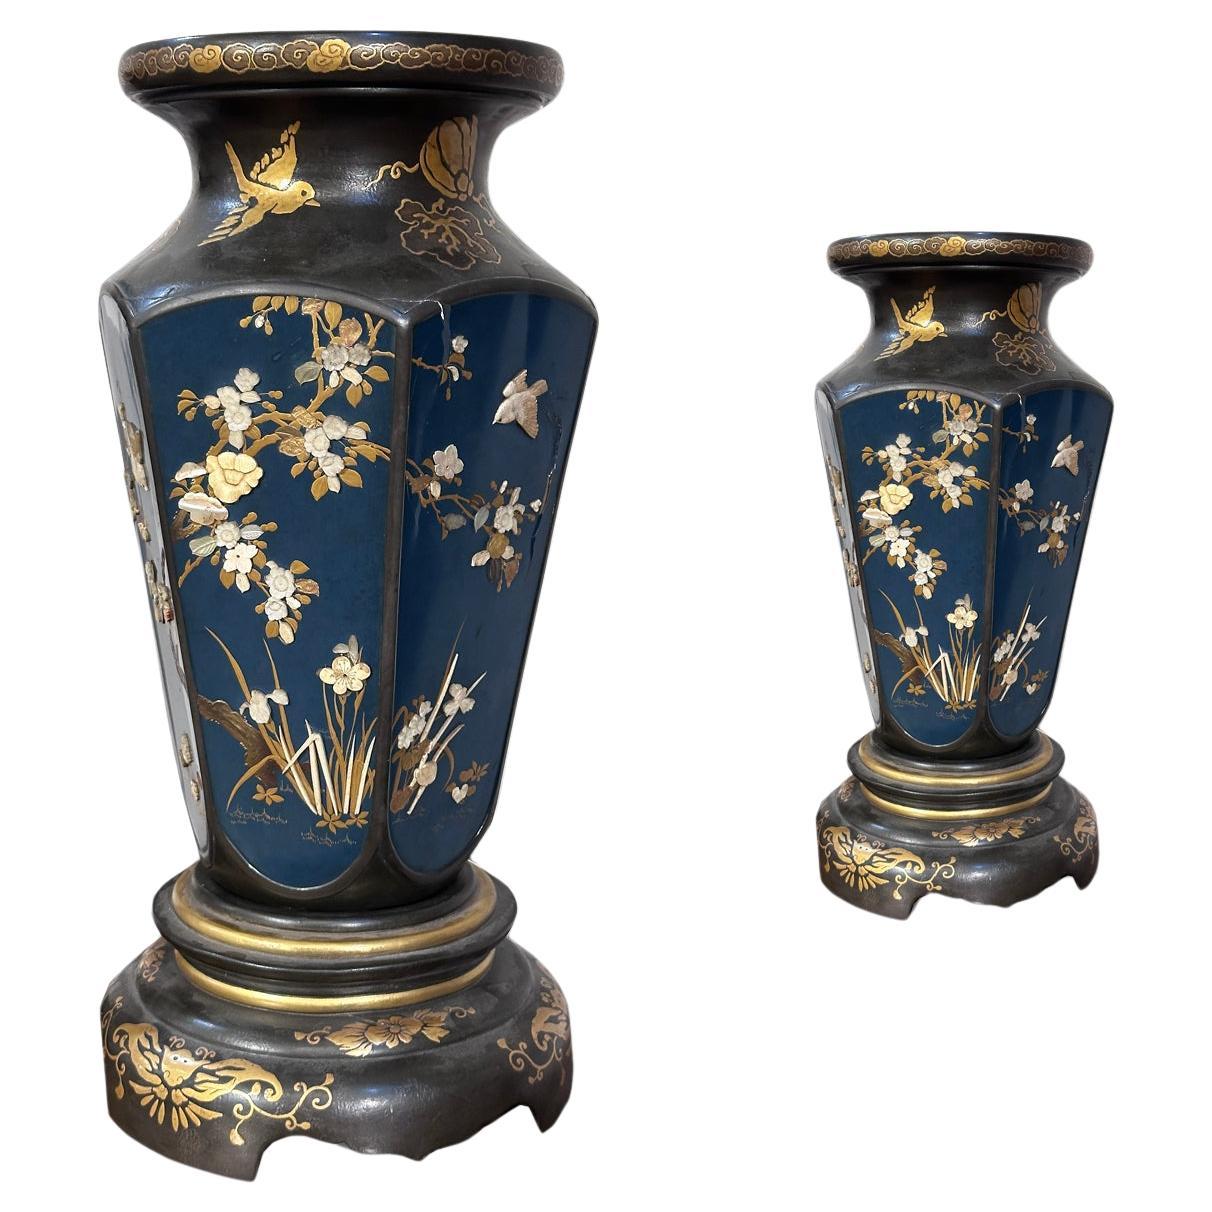 END OF THE 19th CENTURY PAIR OF JAPANESE VASES